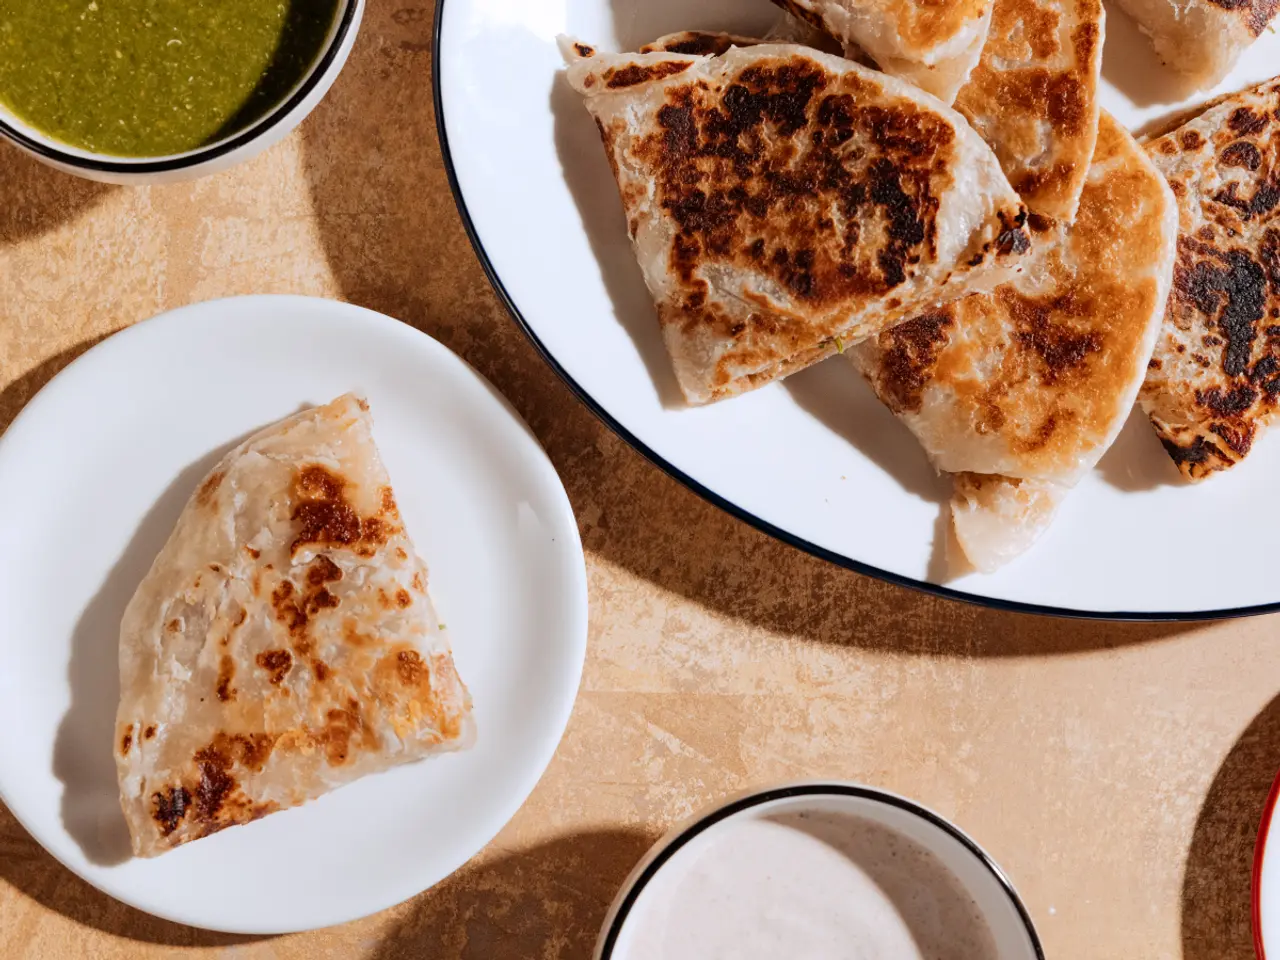 Several pieces of golden-brown flatbread are served on plates with a side of green sauce.